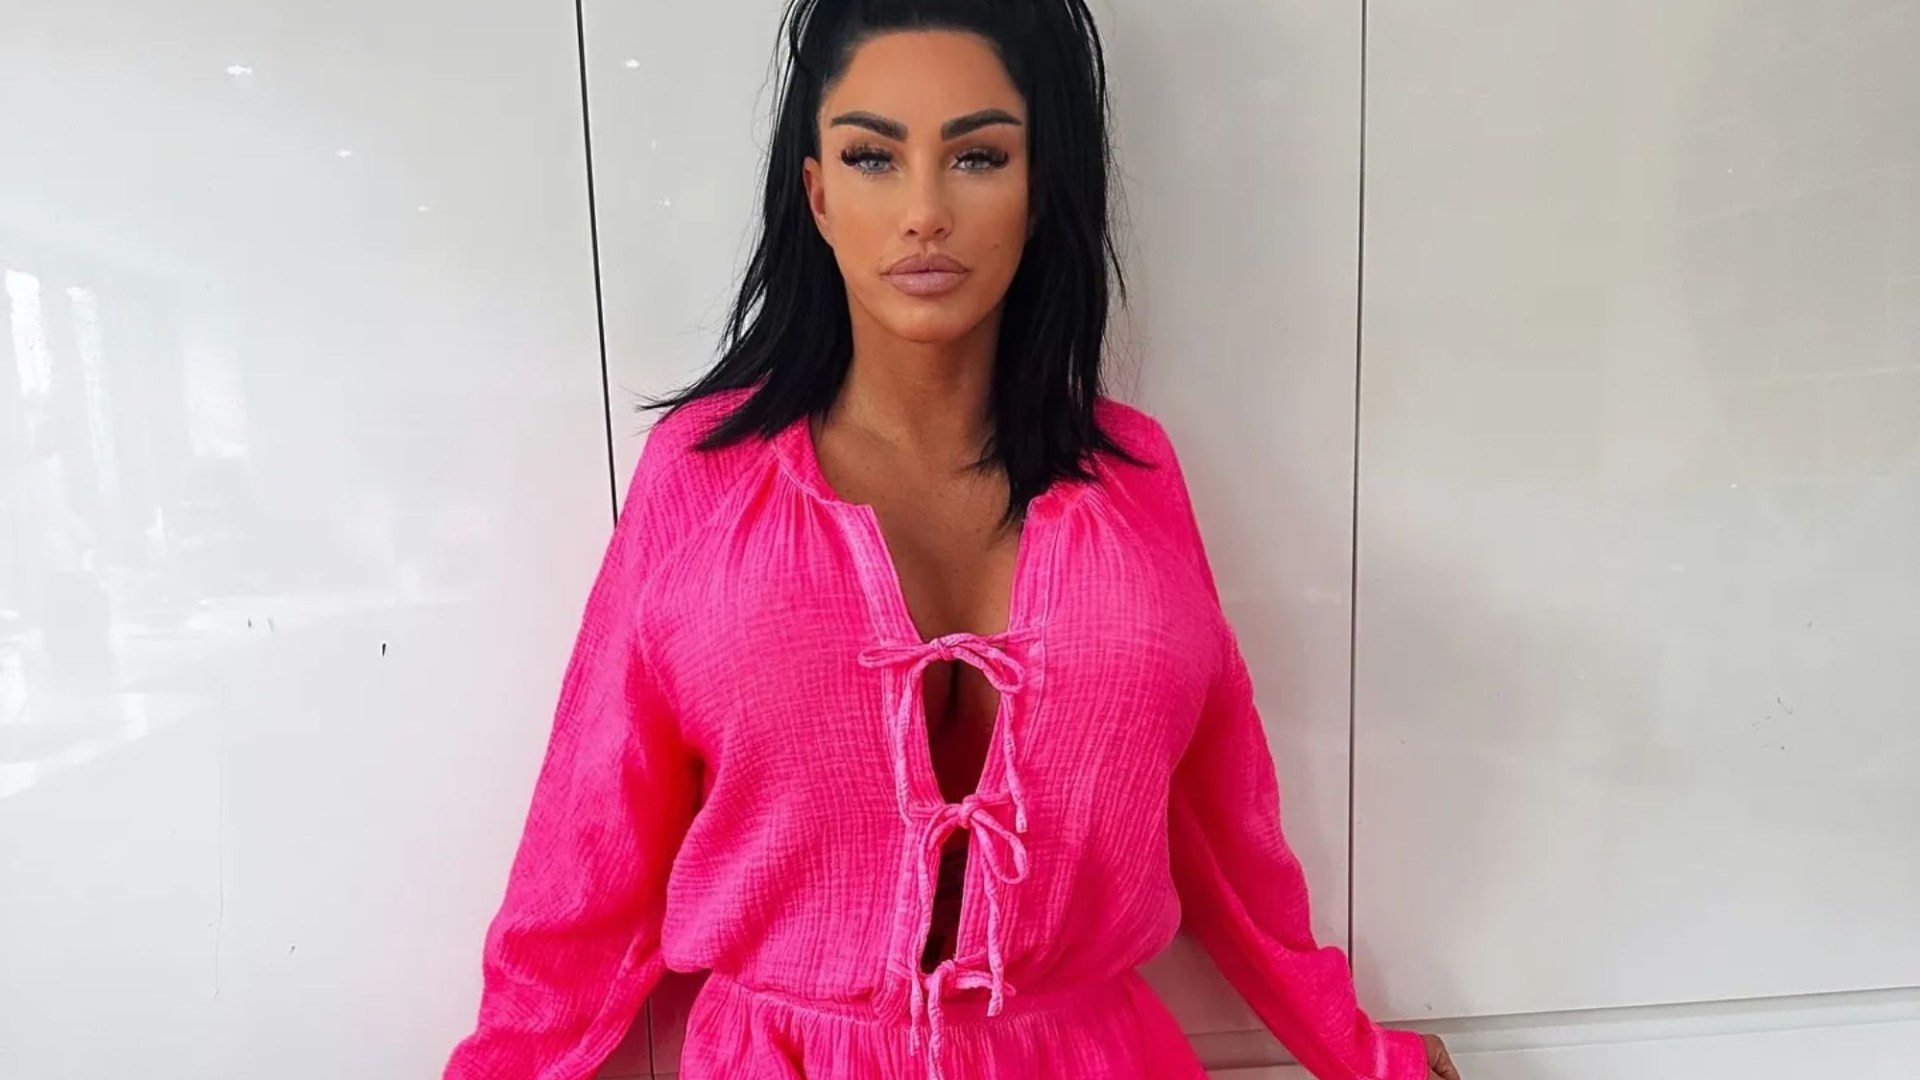 Katie Price fans make urgent plea to bankrupt star after she swerves court for 760 a night Ayia Napa holiday [Video]